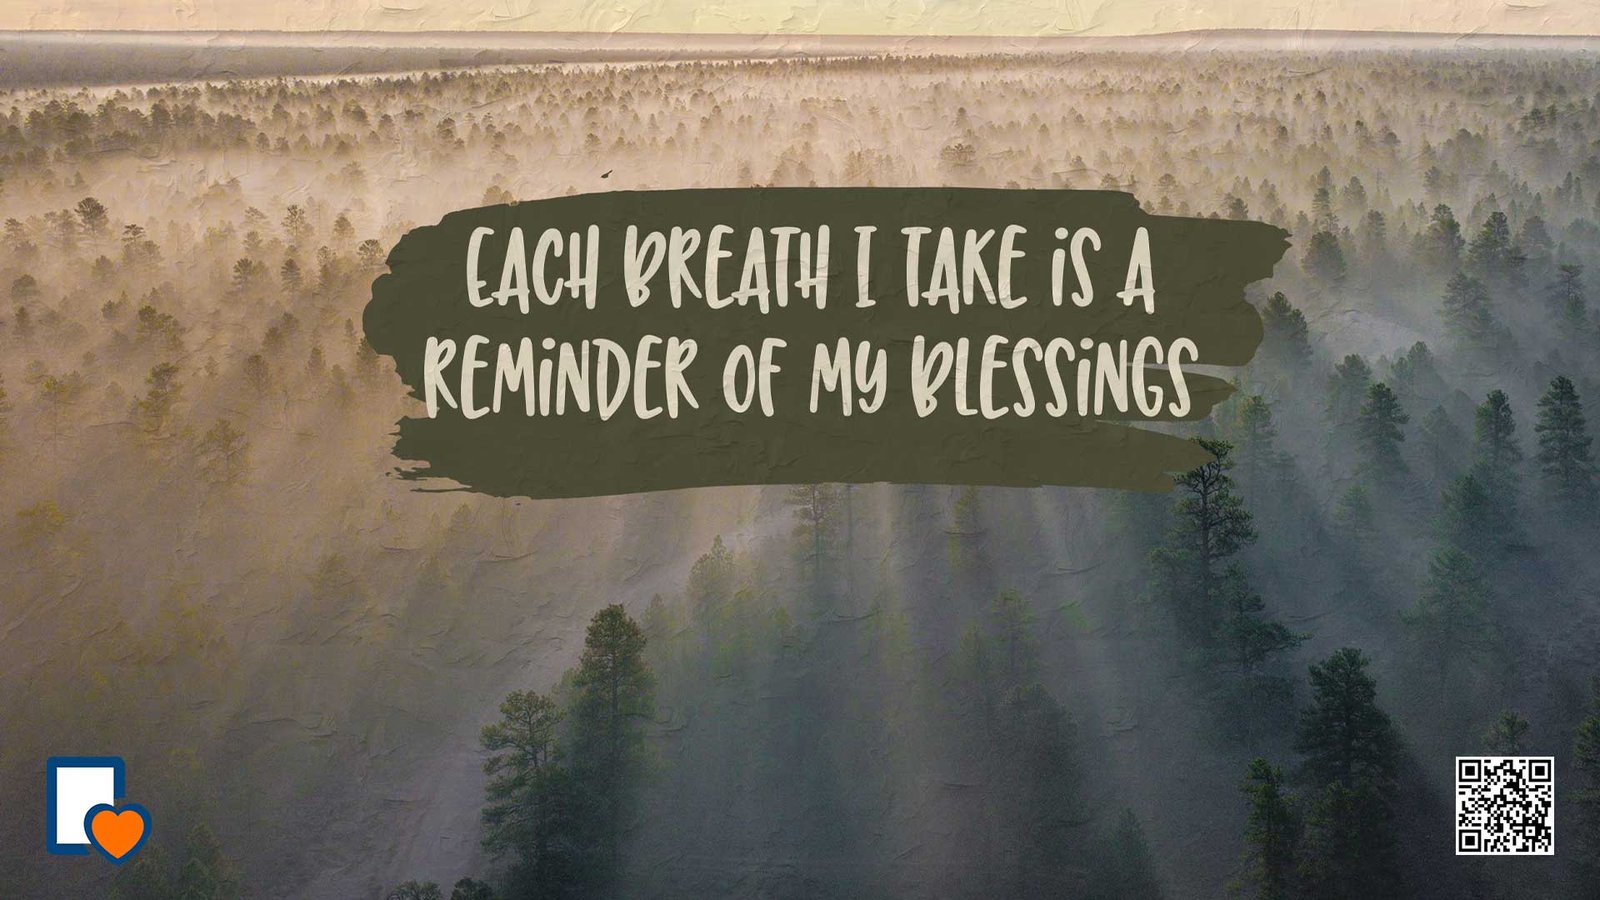 Each breath I take is a reminder of my blessings -Anonymous